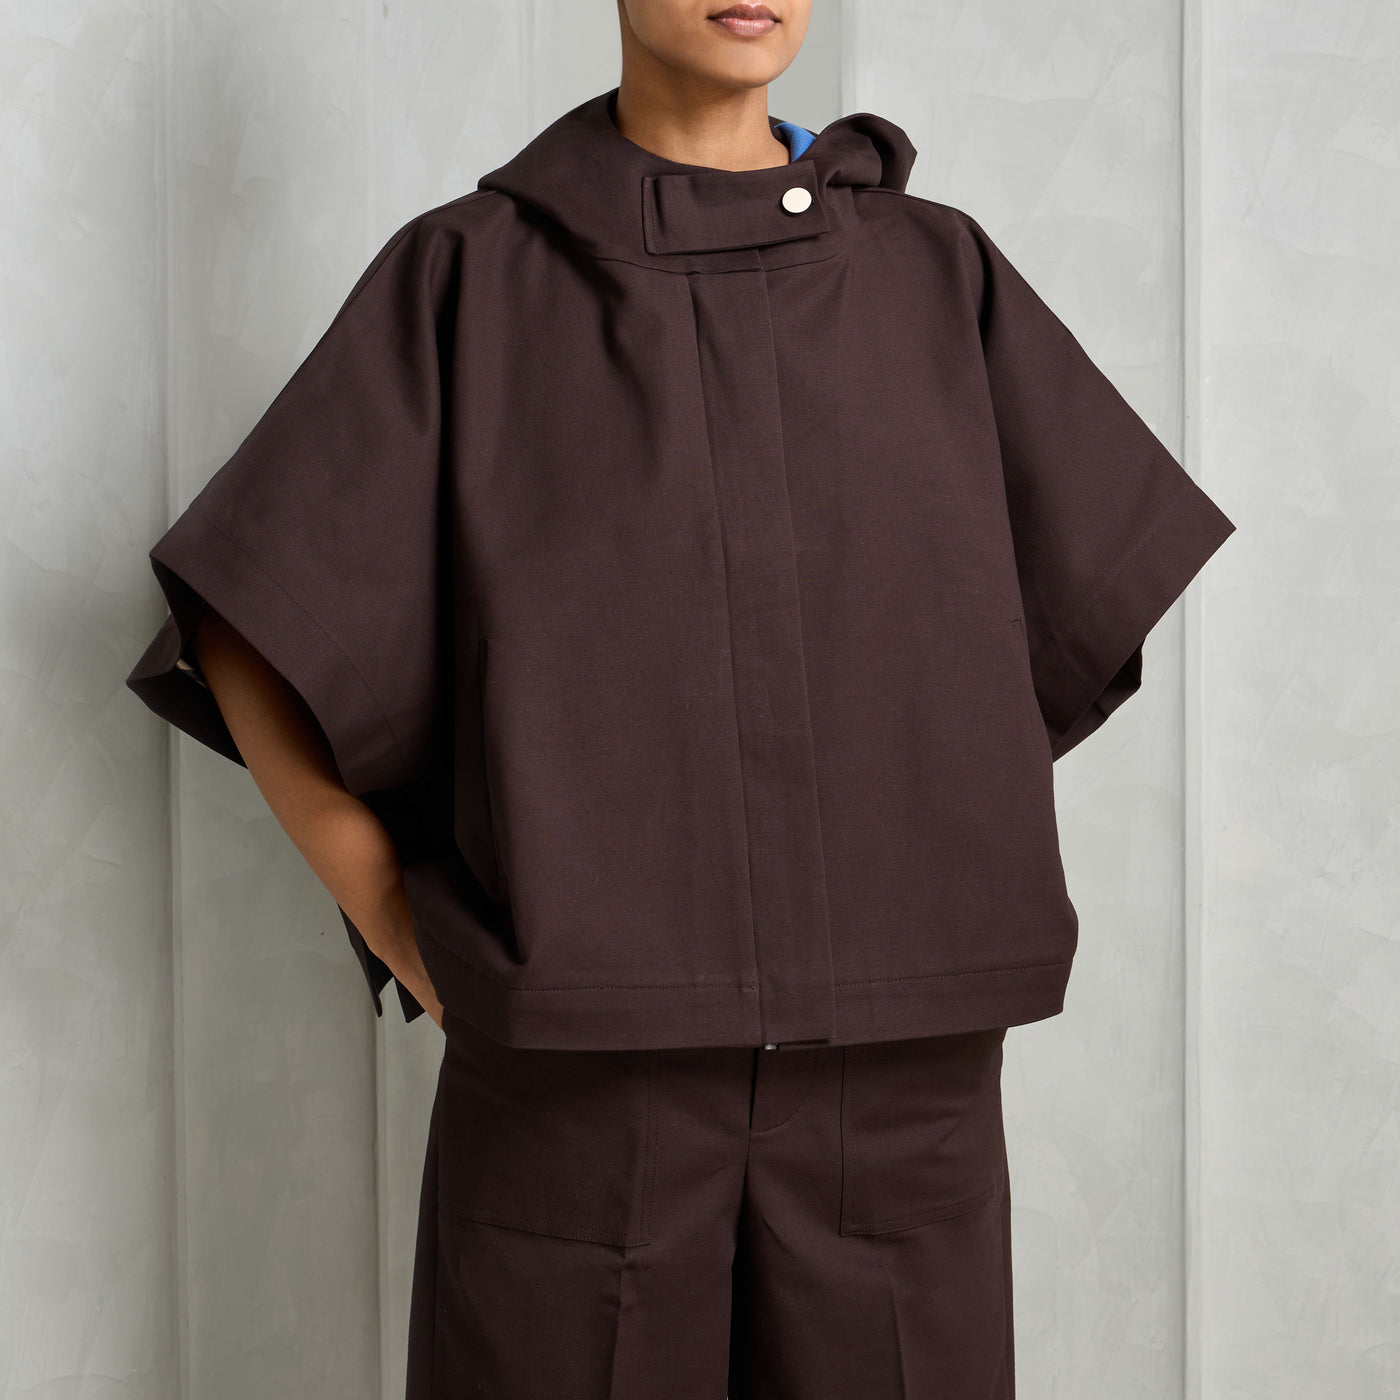 BHAANE hooded postmaster poncho